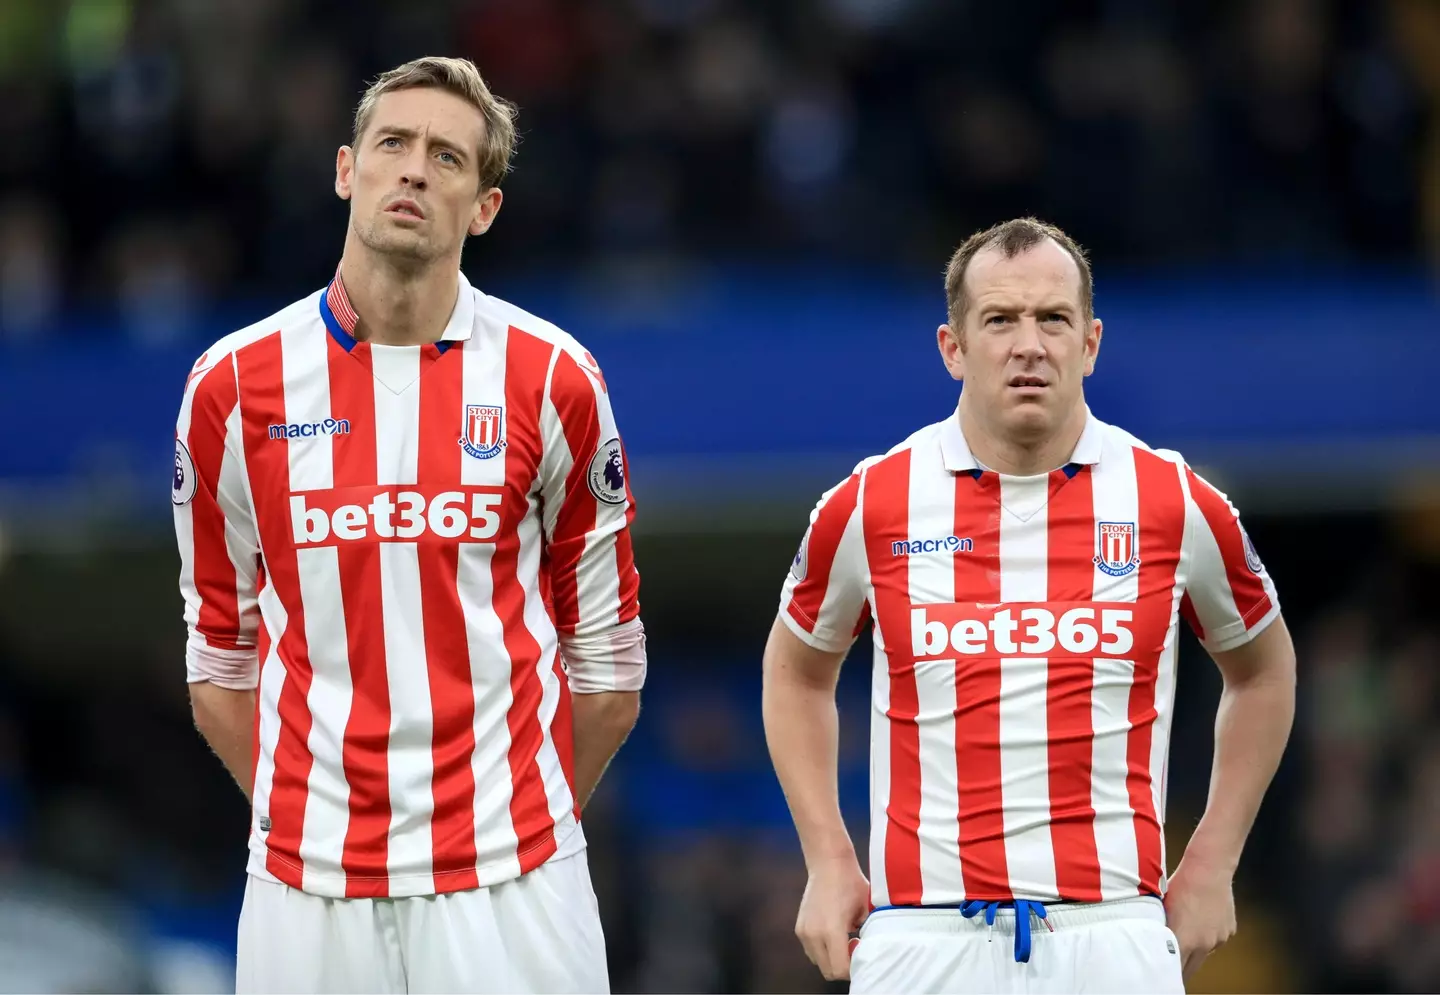 Peter Crouch has previously joked about Charlie Adam's attempts to curry favour with managers (Image: Alamy)